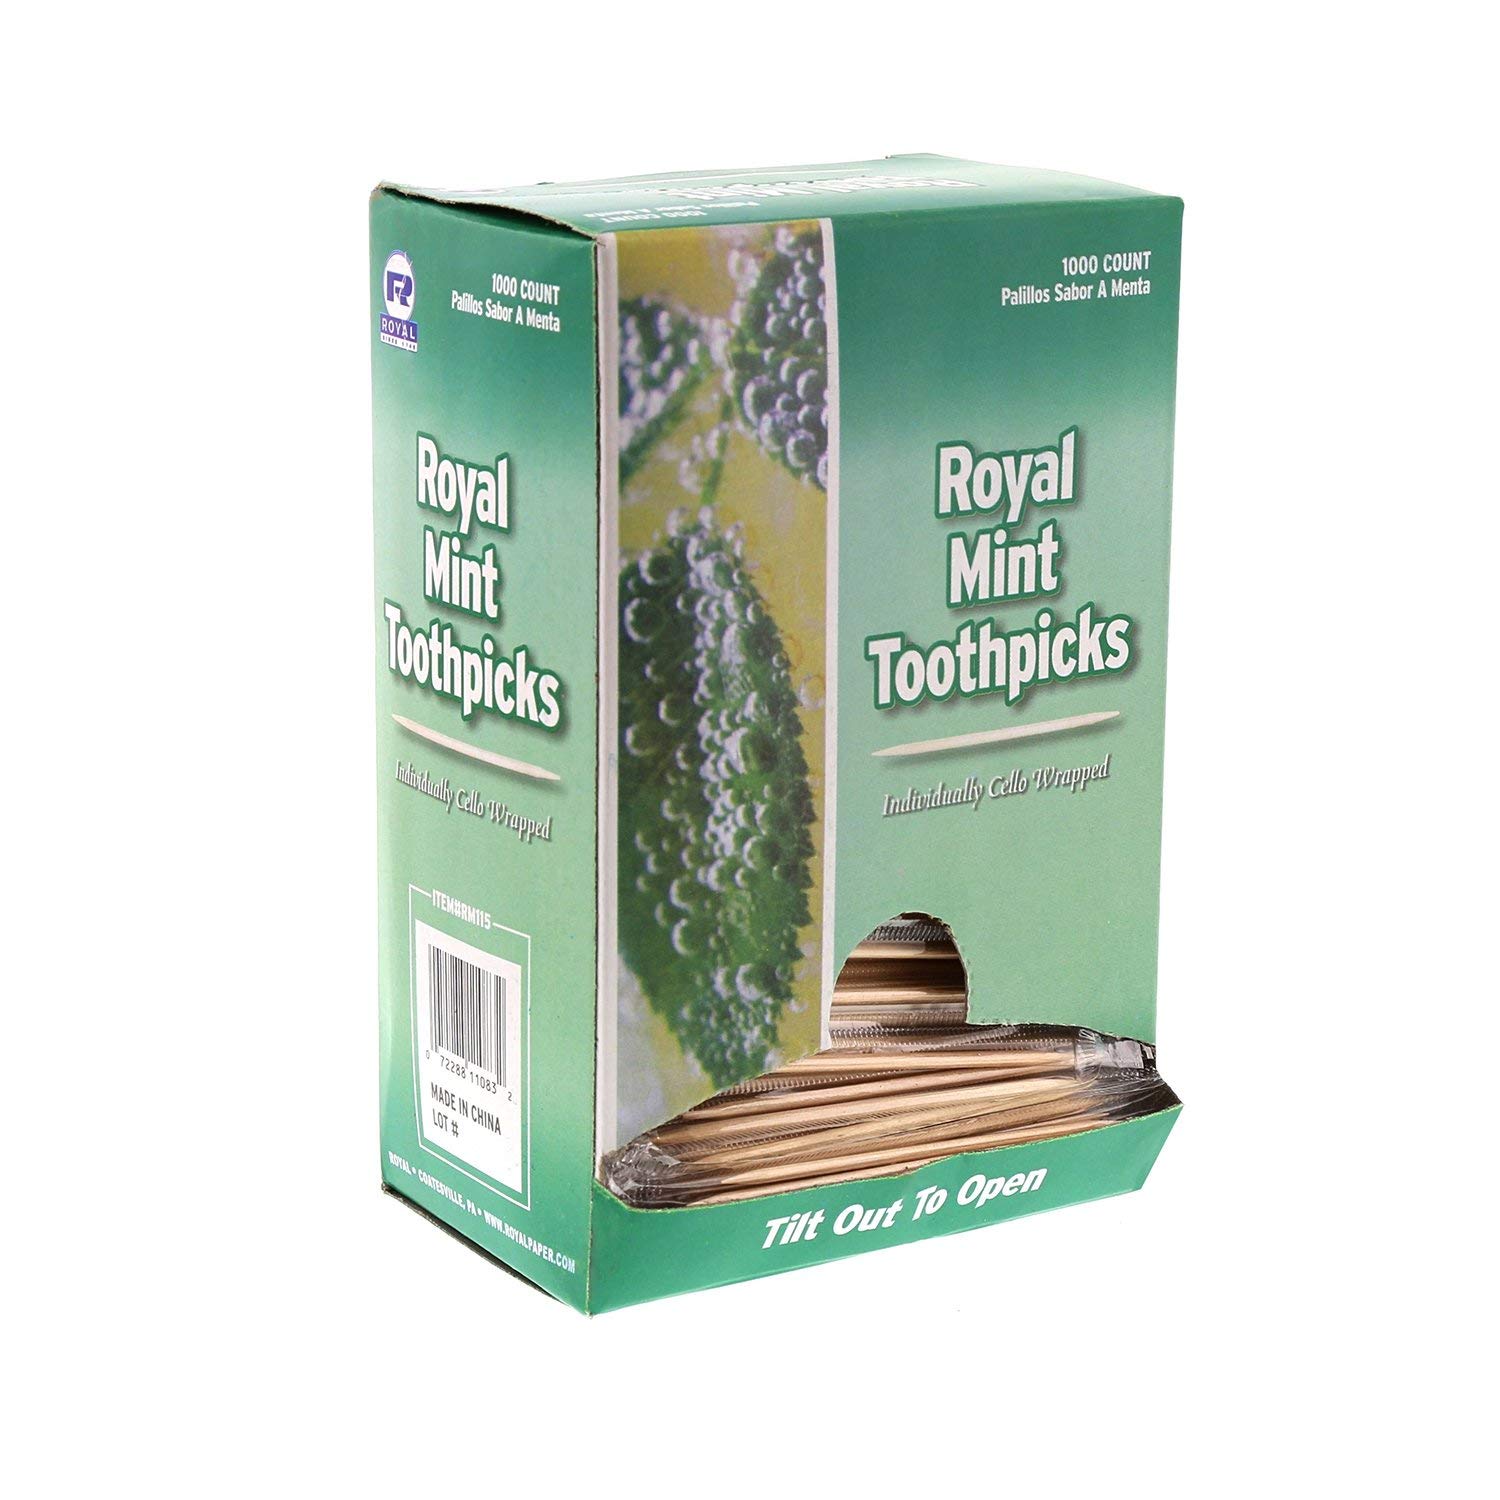 3000 Royal Mint Toothpicks (3x 1000 Ct Boxes)